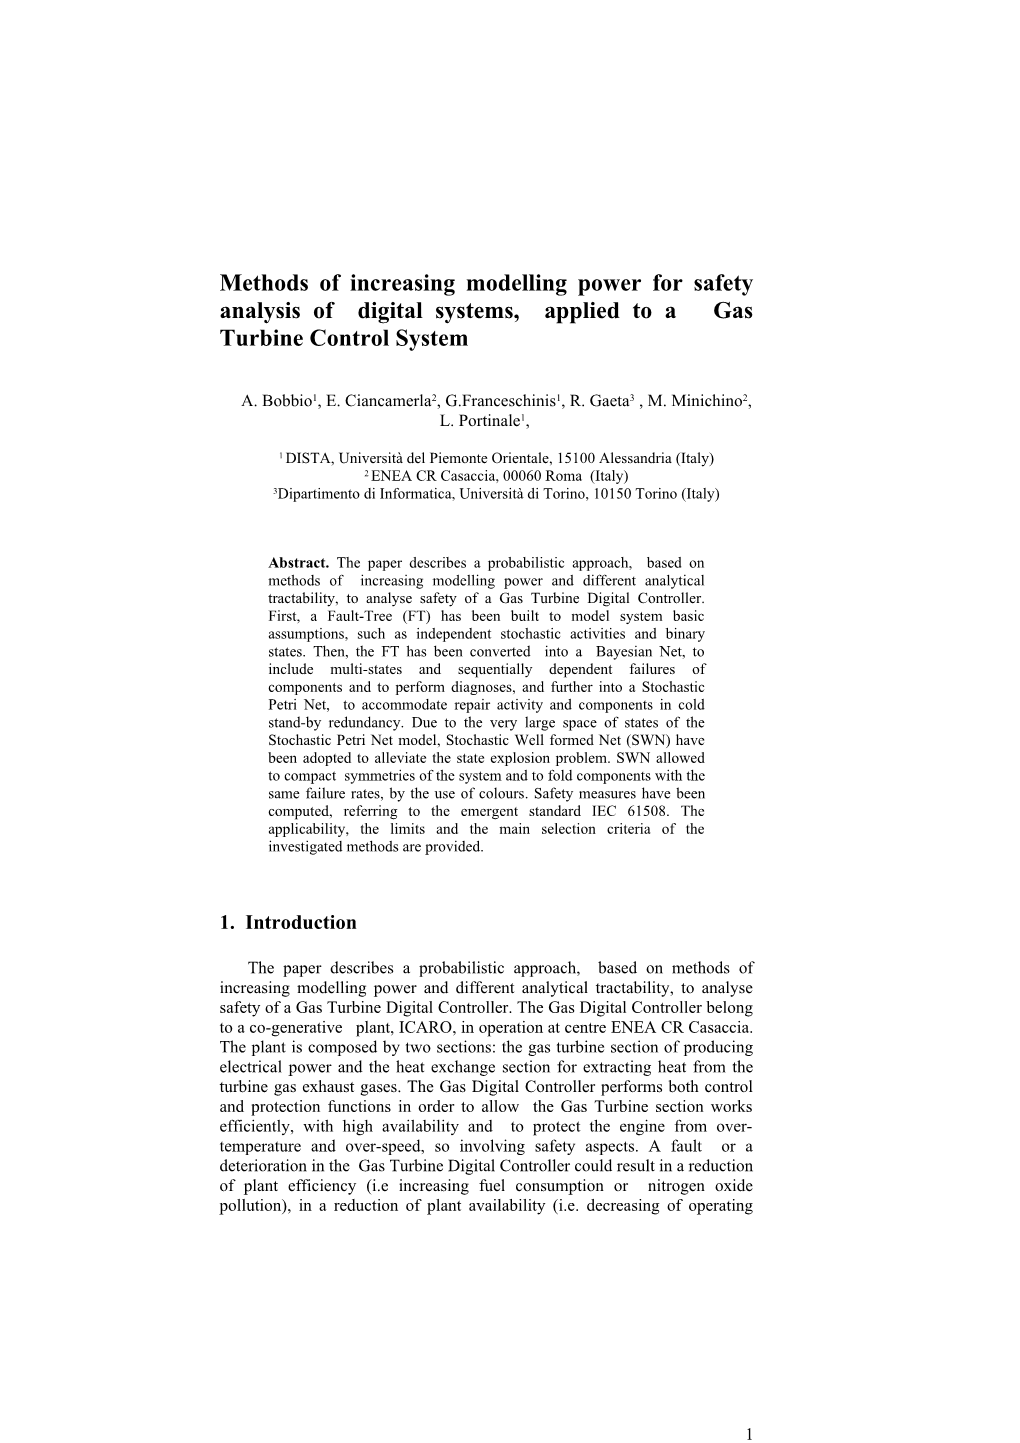 Methods of Increasing Modelling Power for Safety Analysis of Digital Systems